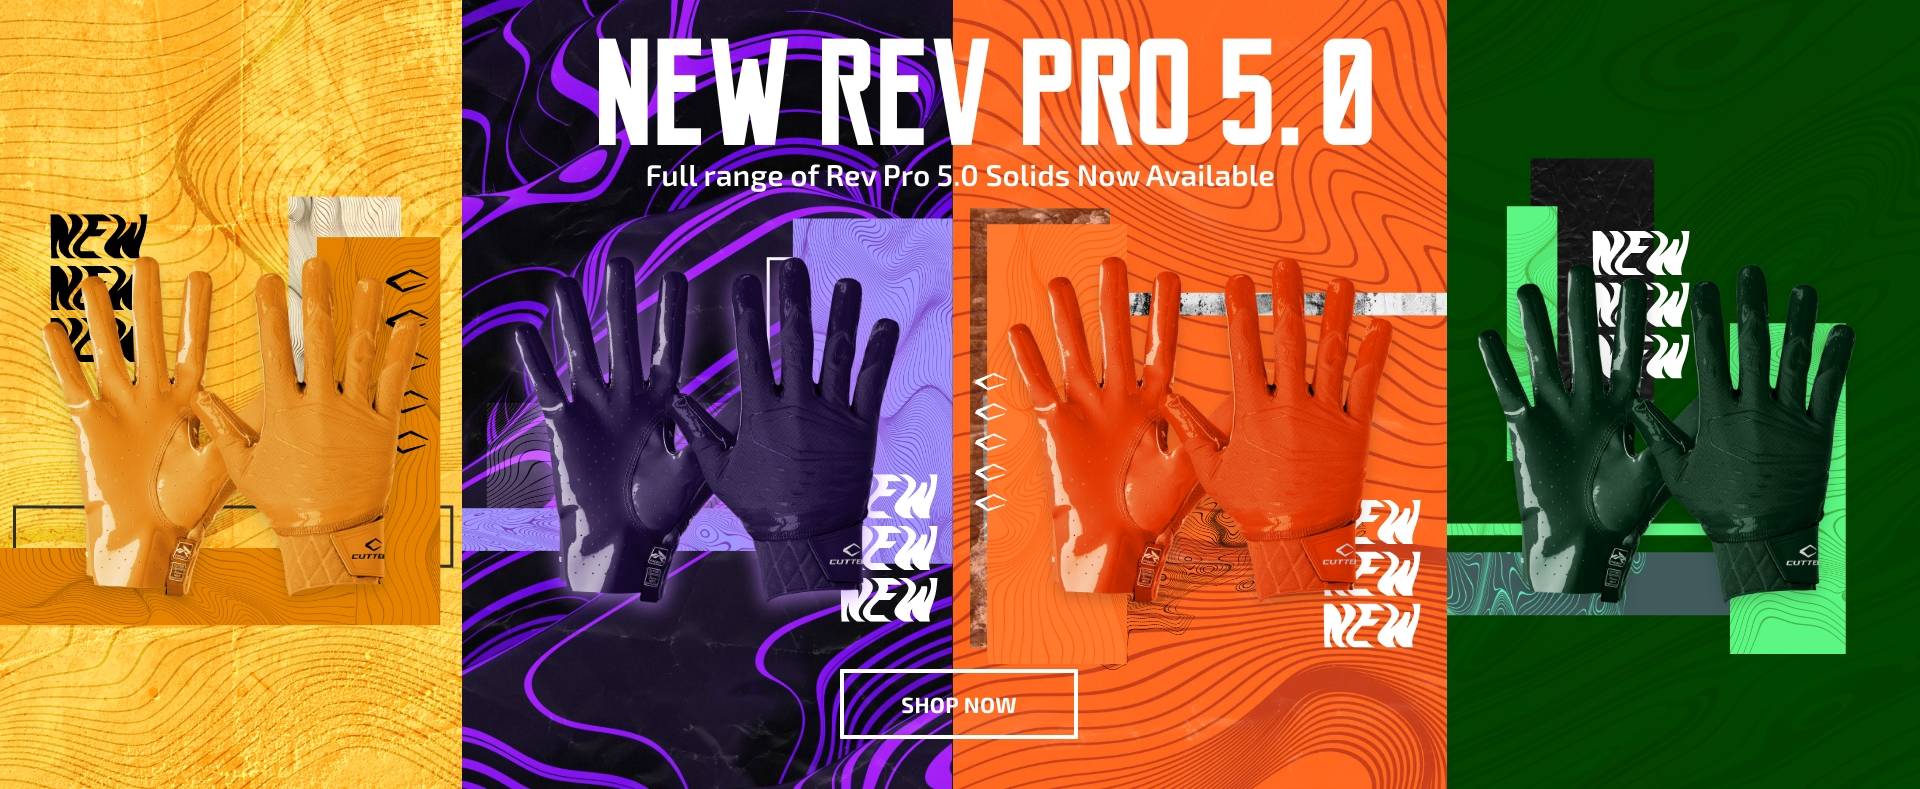 New Rev Pro 5.0 - Full range of Rev Pro 5.0 Solids Now Available - Shop Now